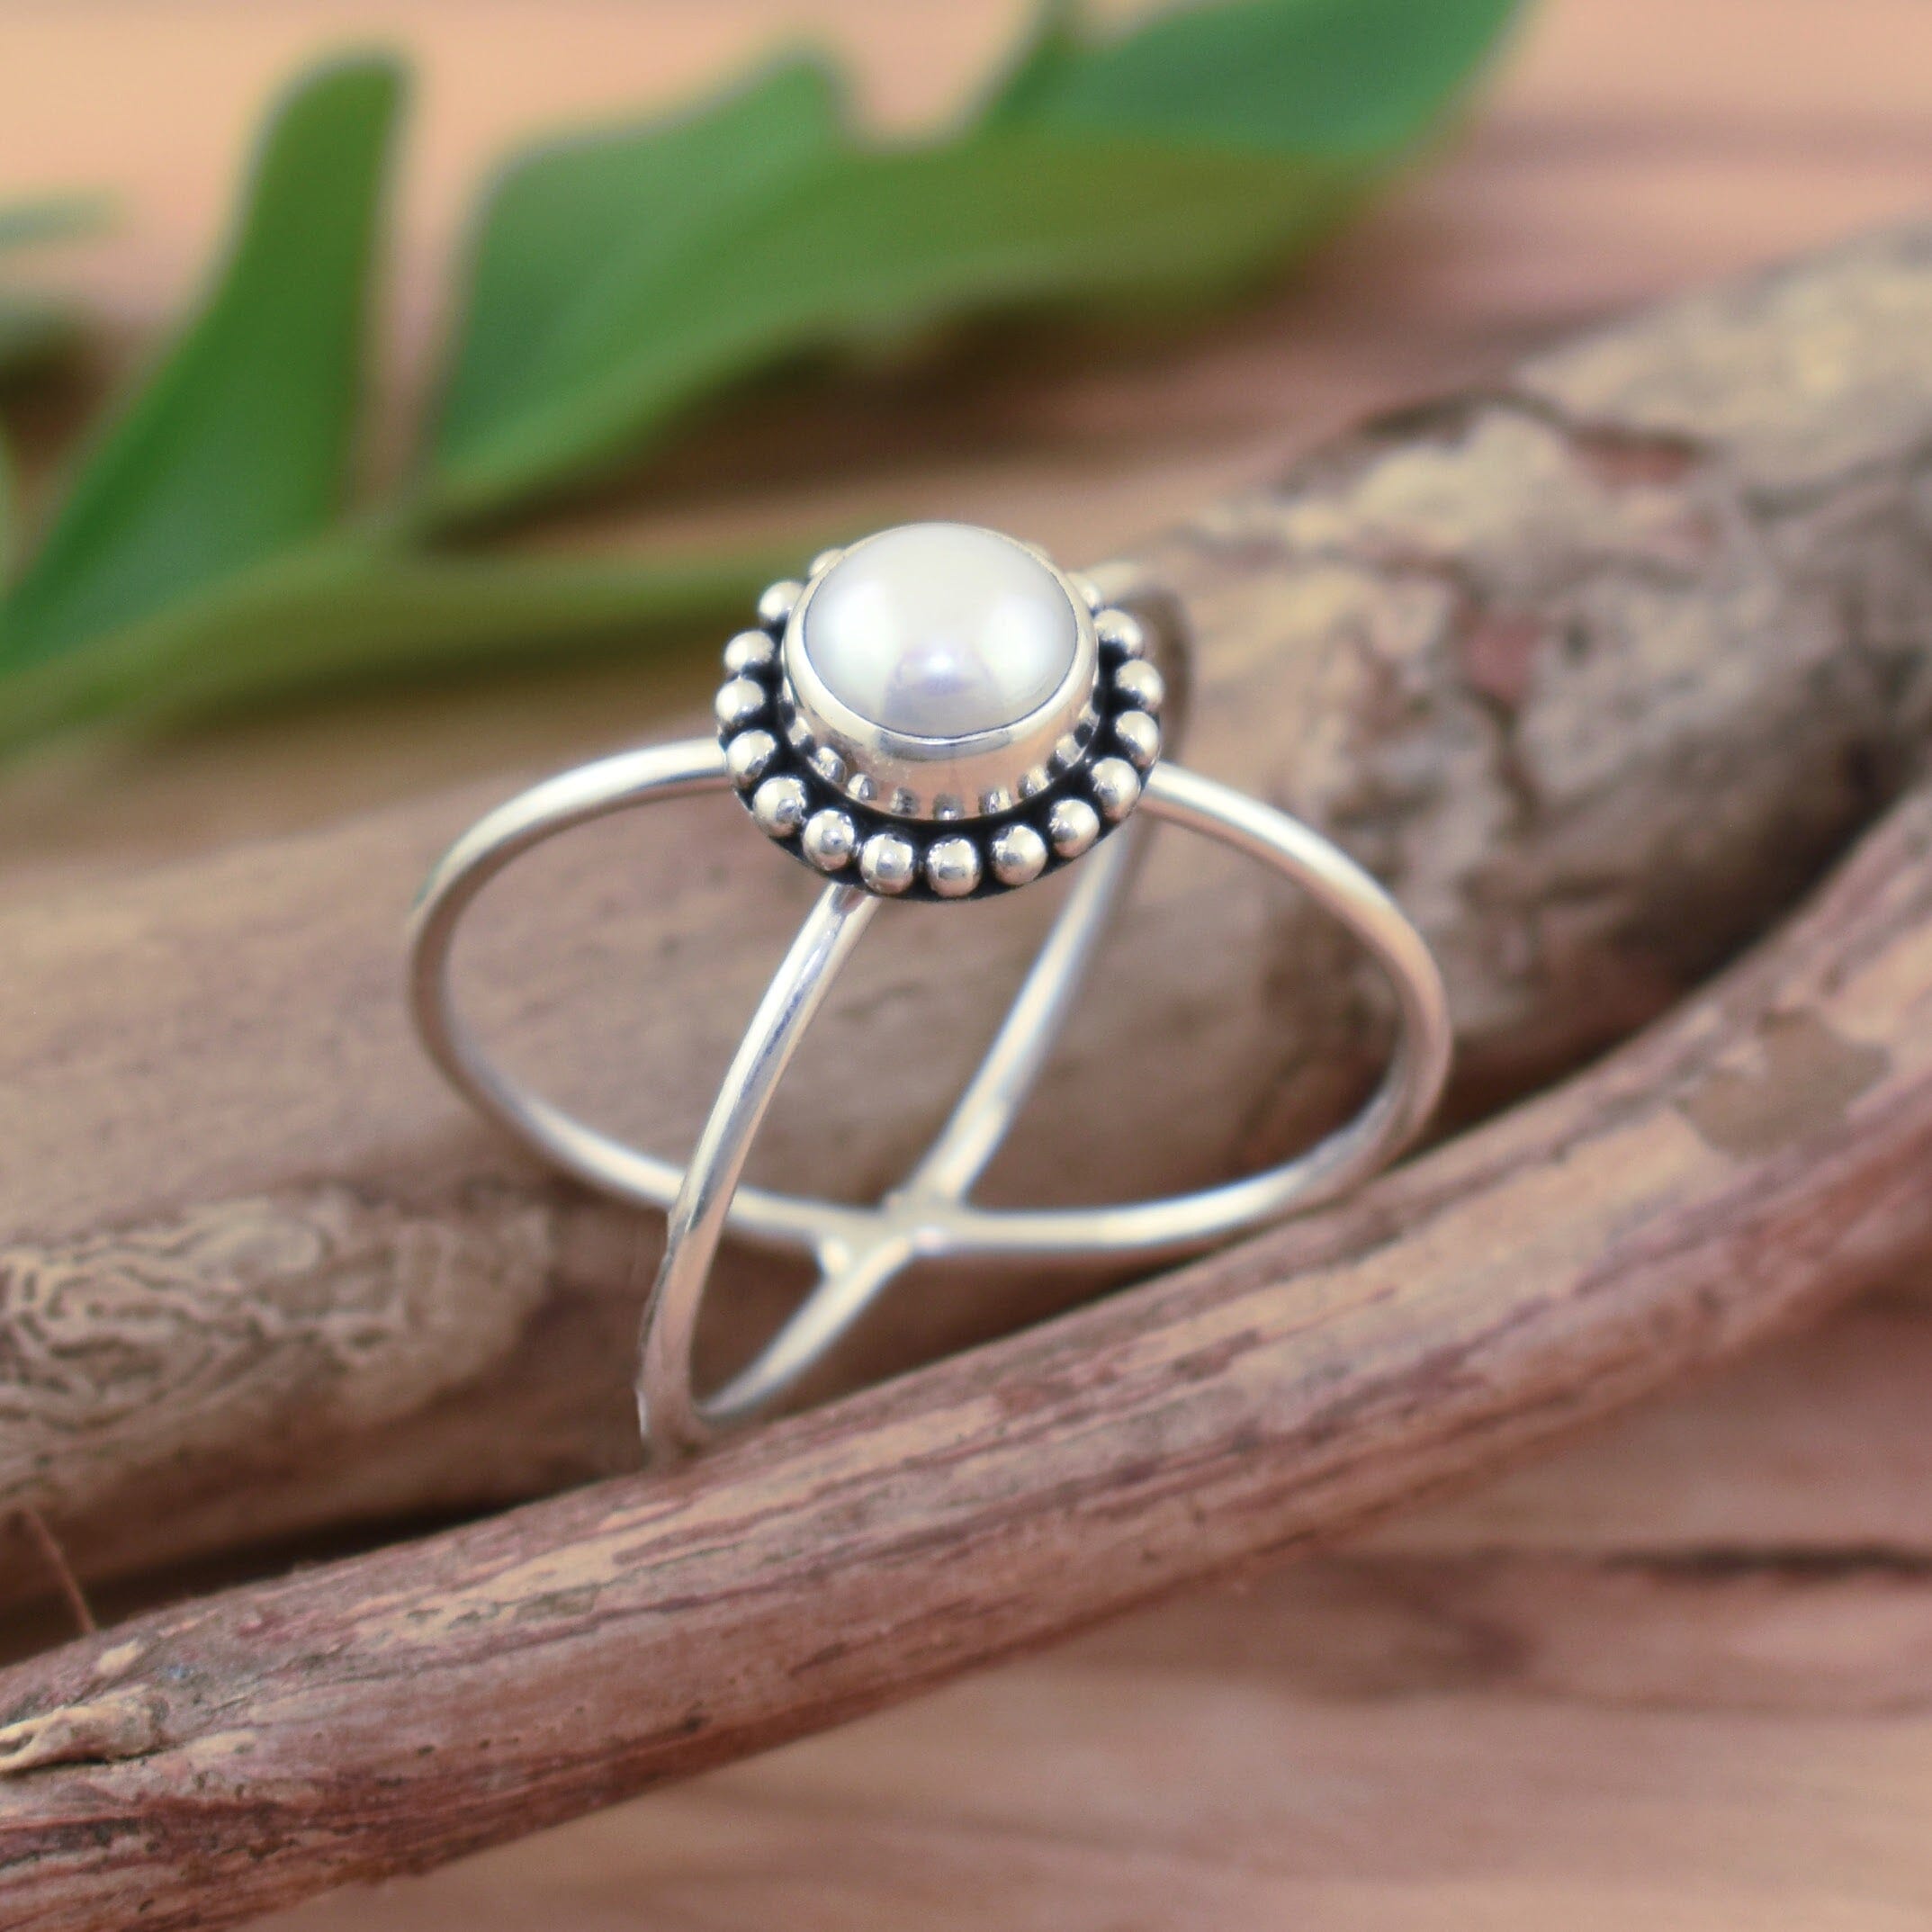 Pearl Orbit in handcrafted sterling silver and pearl